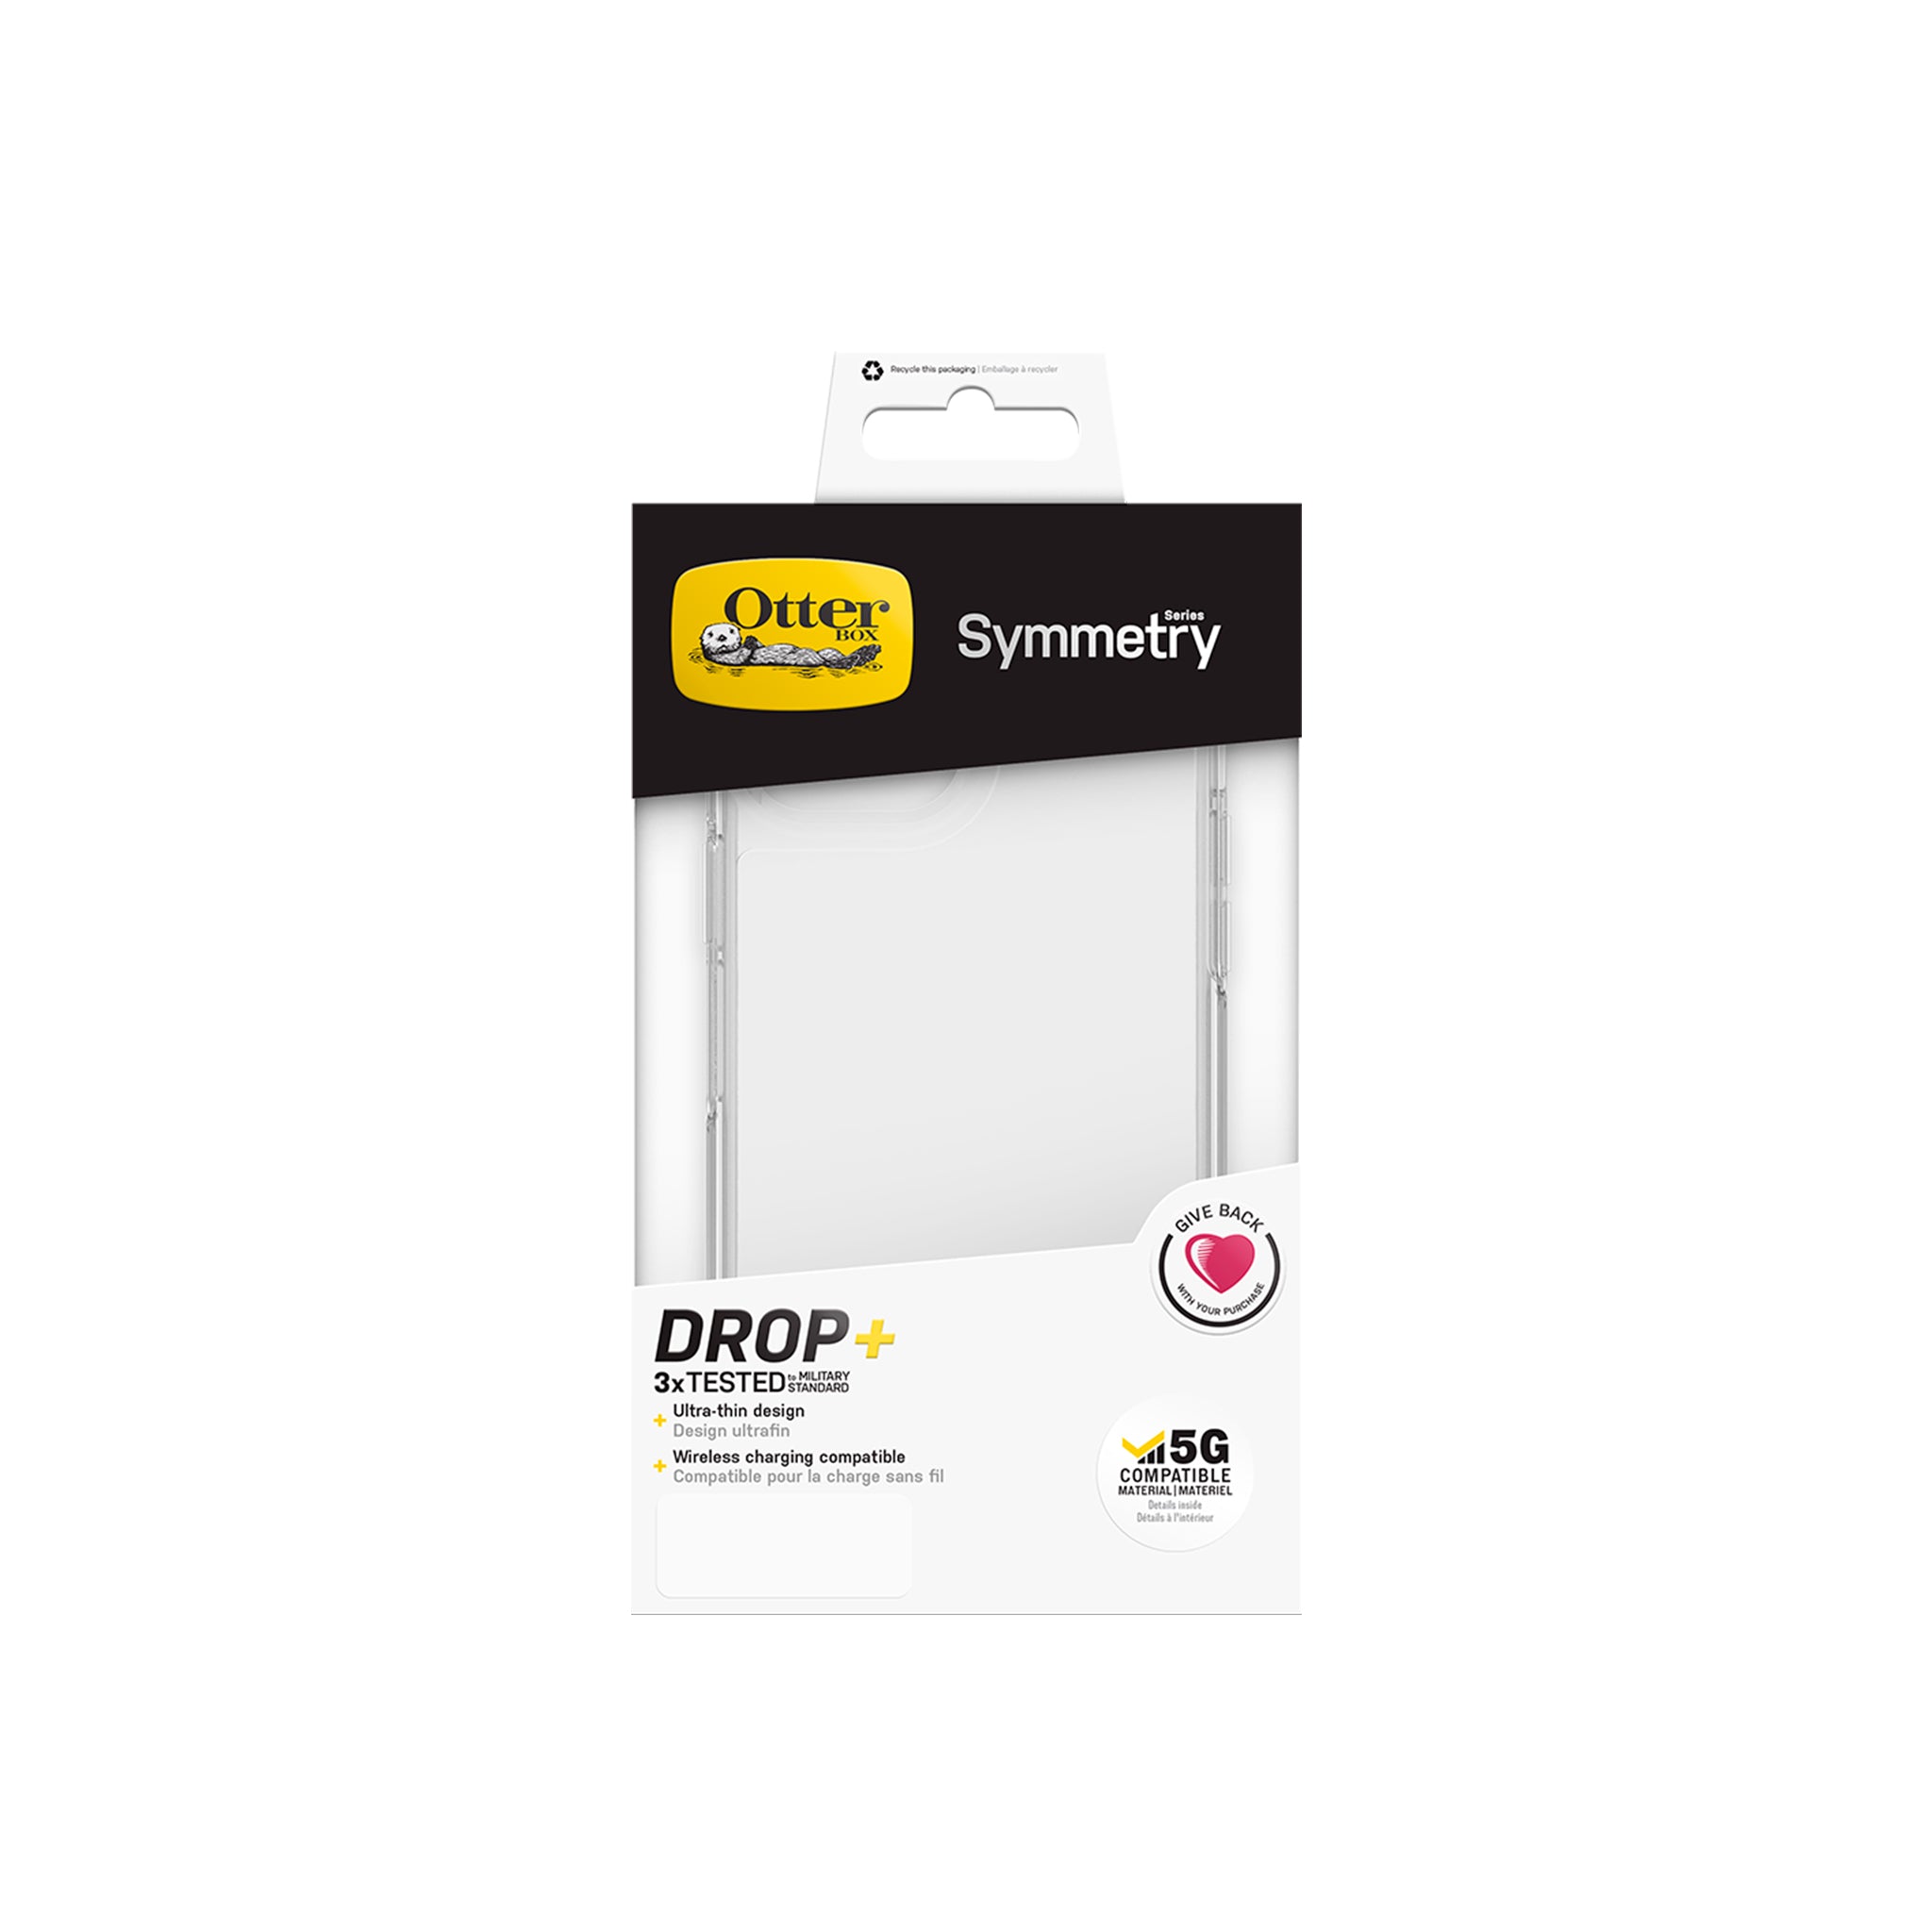 OtterBox - Symmetry Clear for Iphone 12 Pro Max - CLEAR